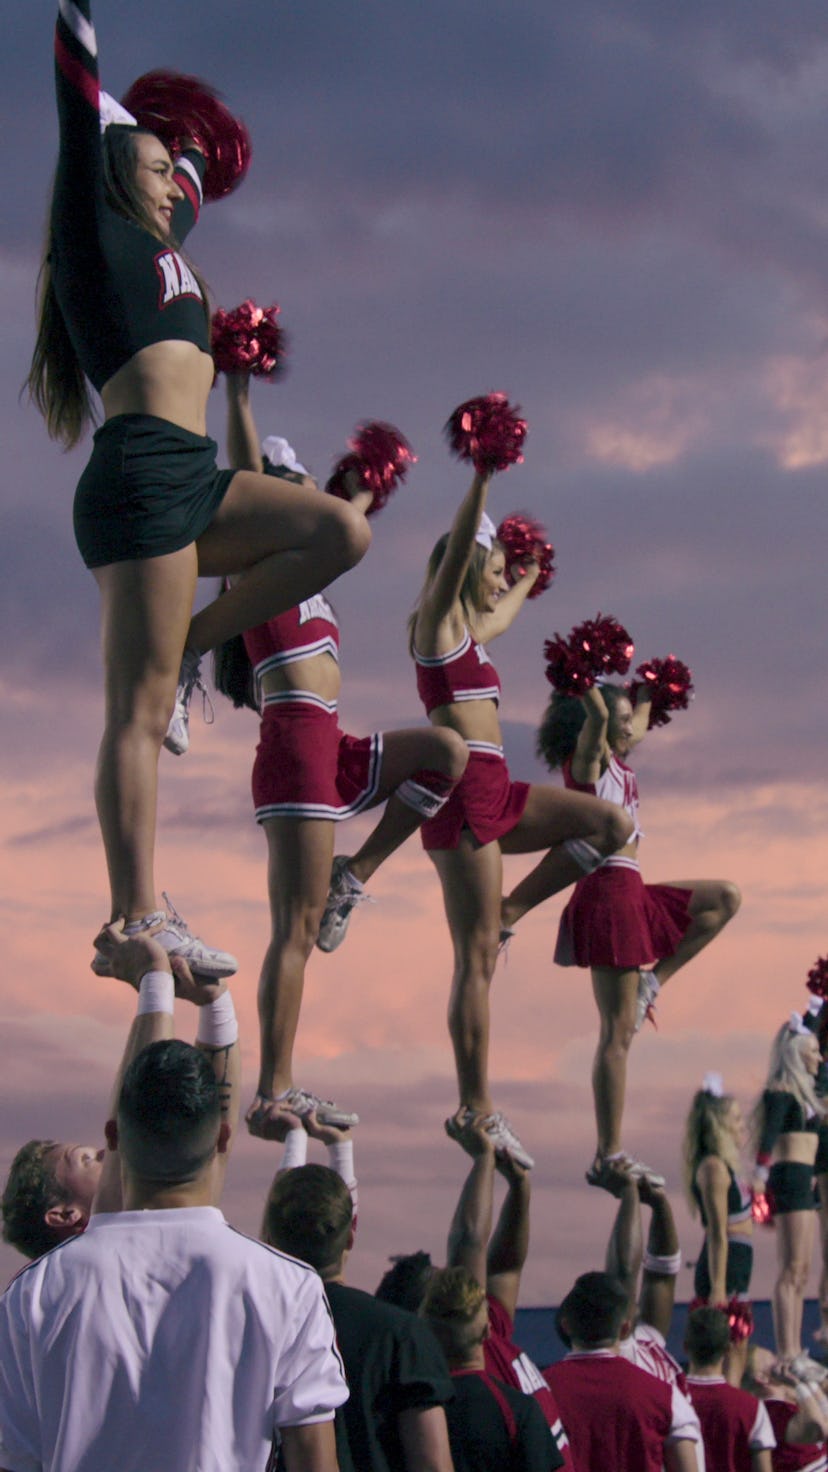 'Cheer' Season 2 features all the best 2022 activewear trends. 